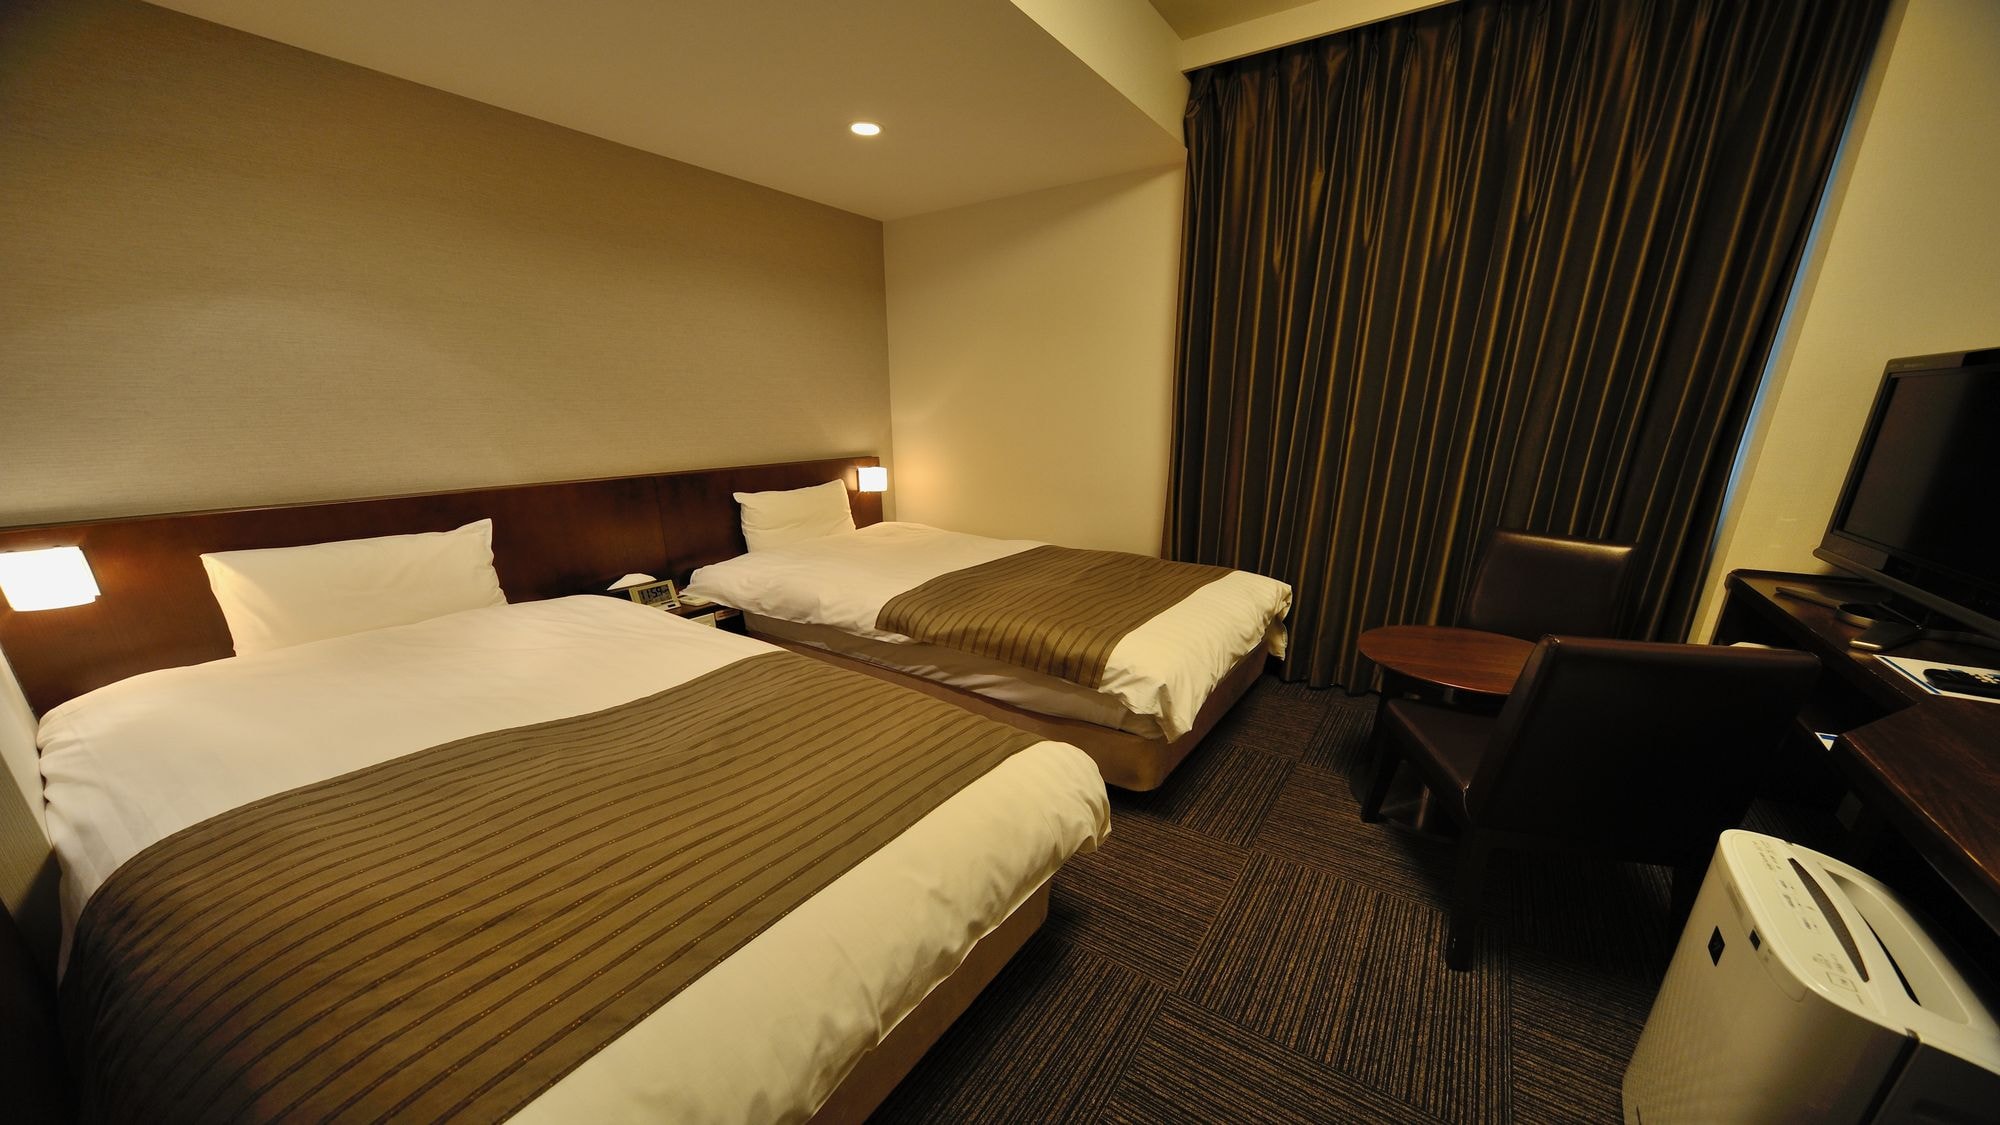 ■ Twin room [No smoking] (Simmons bed: 100 & times; 2 single beds of 195 cm) 18 sqm